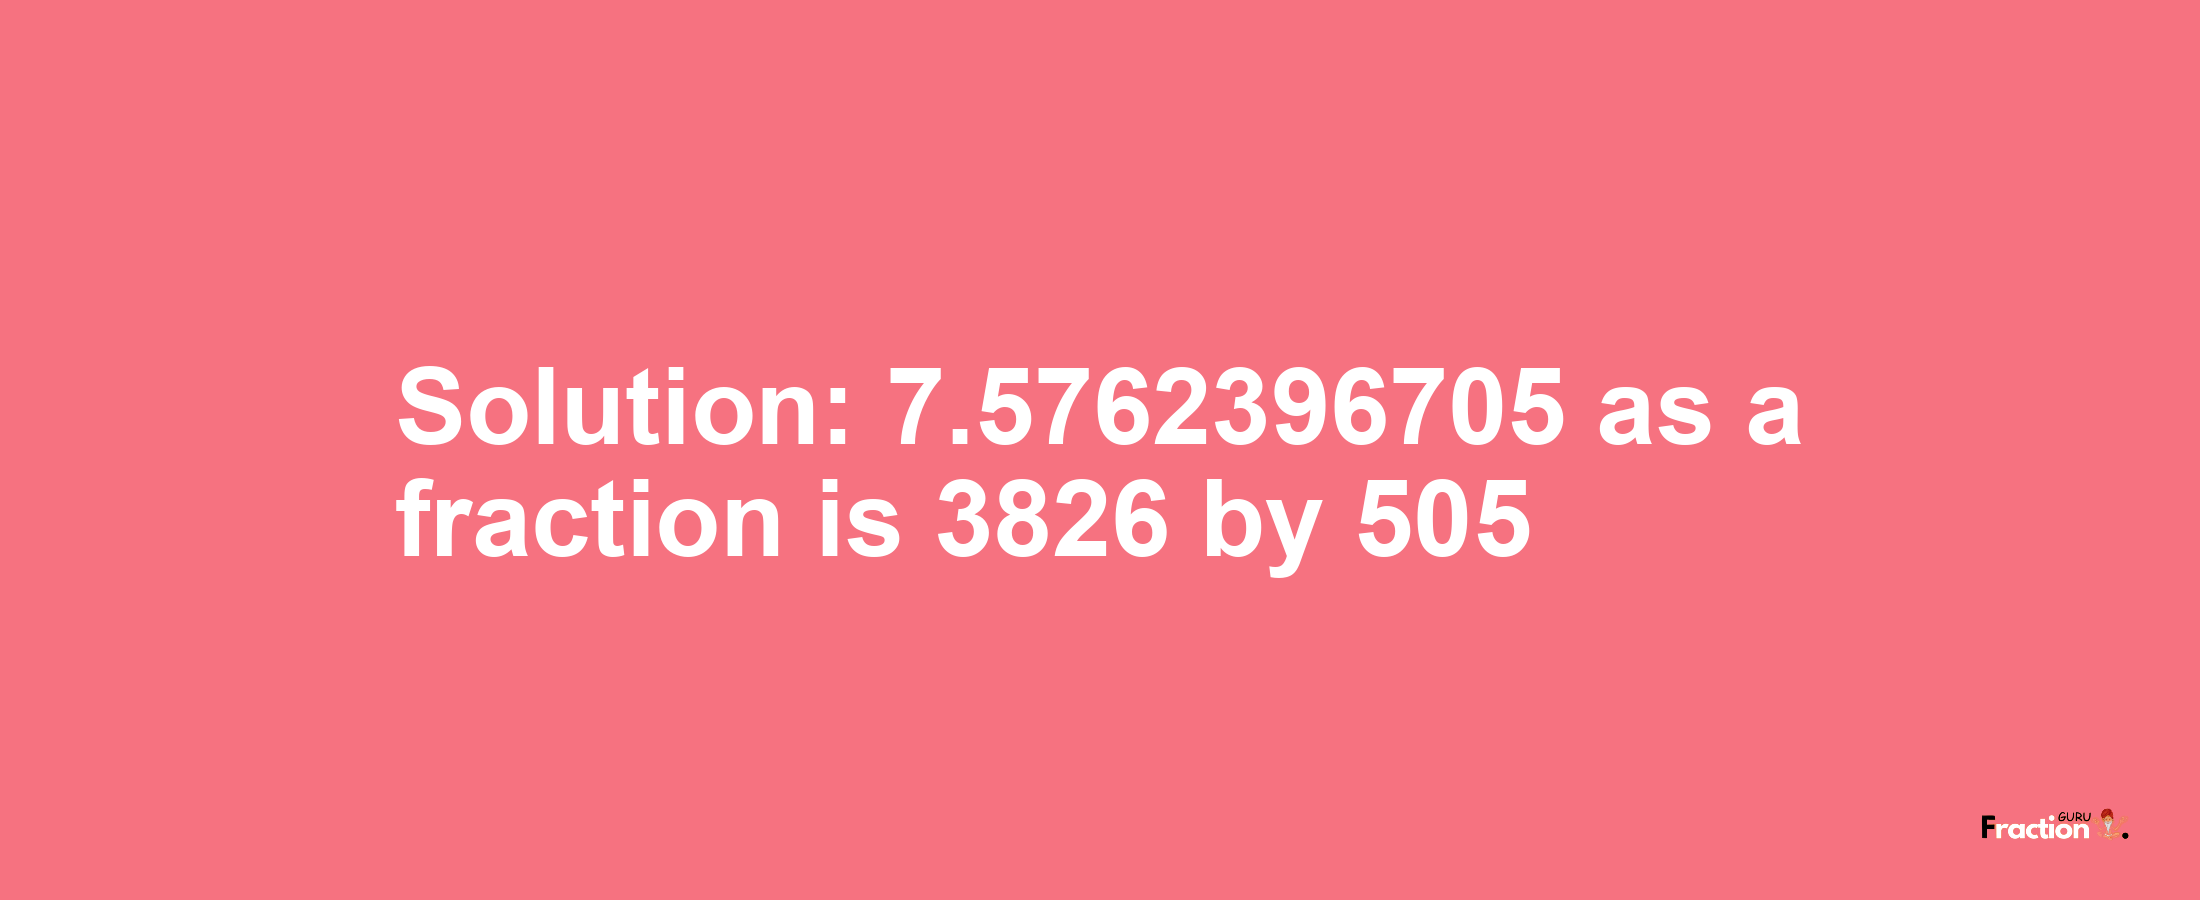 Solution:7.5762396705 as a fraction is 3826/505